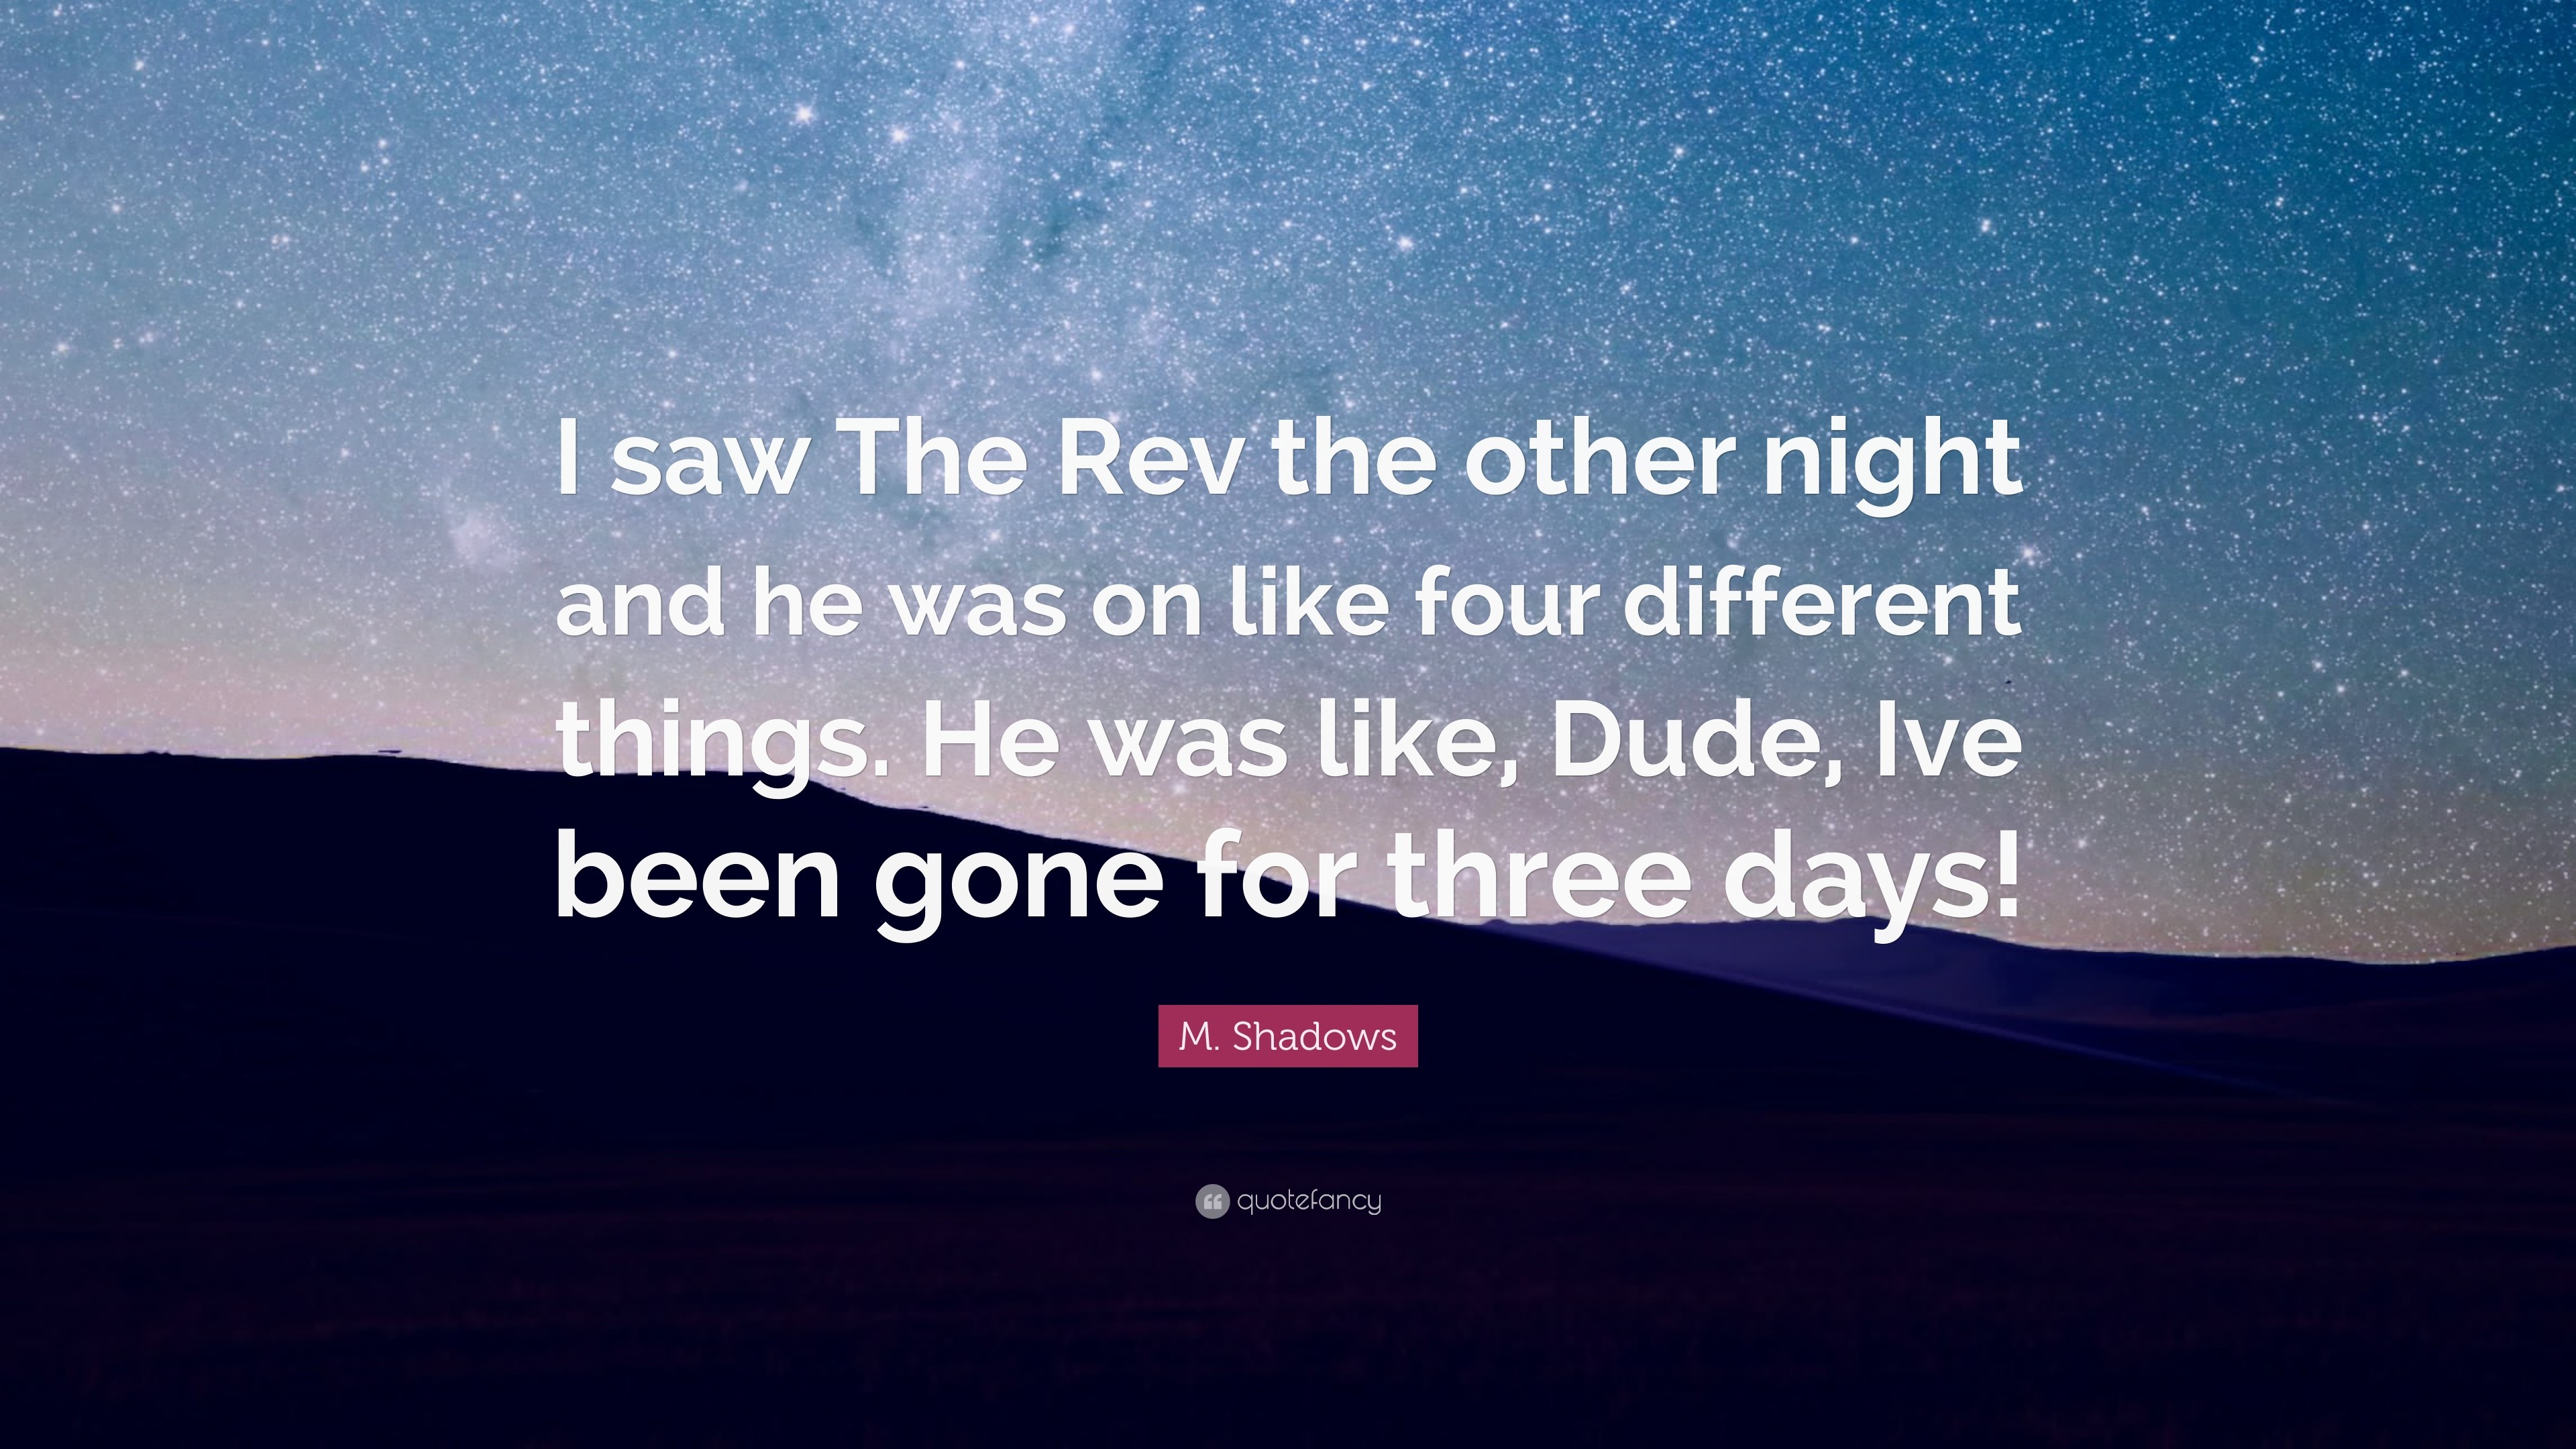 3840x2160 M. Shadows Quote: “I saw The Rev the other night and he was